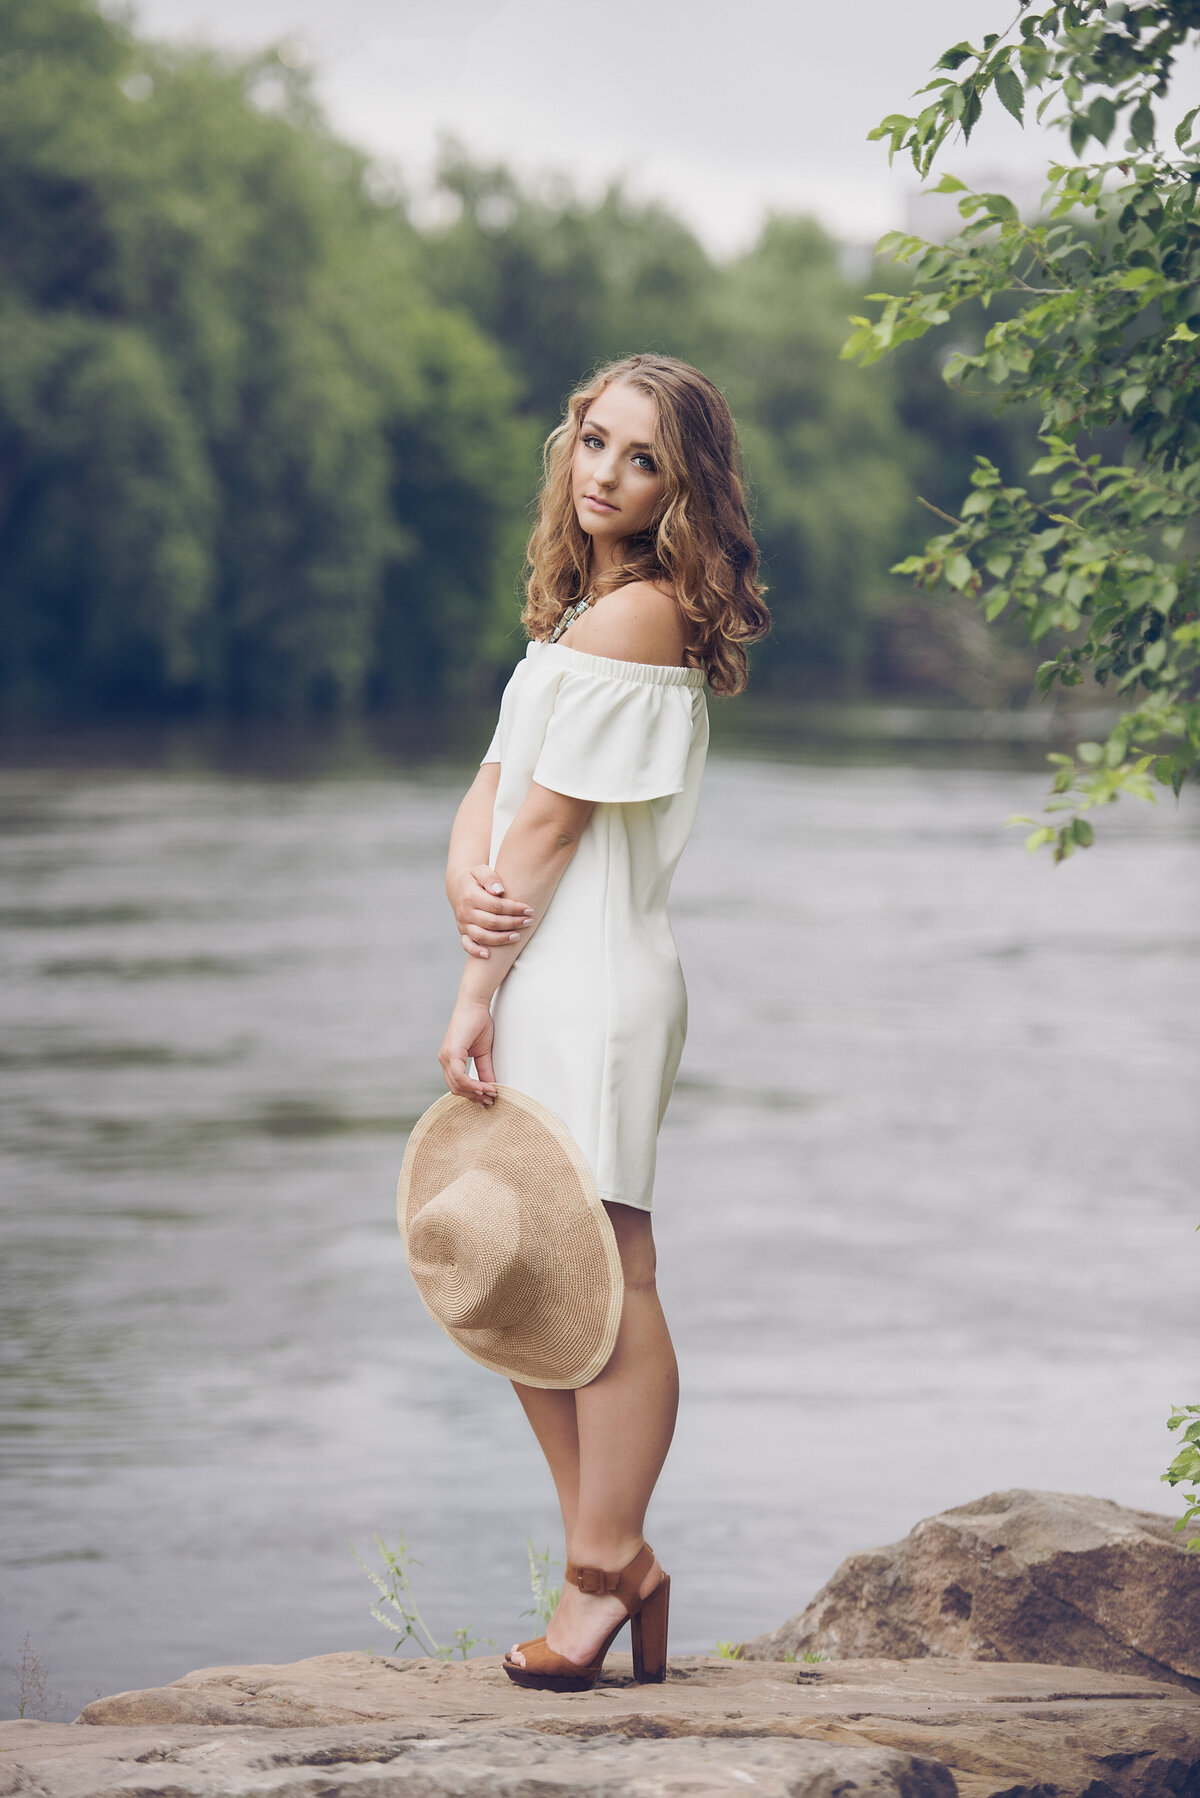 Chanhassen senior photo of girl by river with a white dress and hat